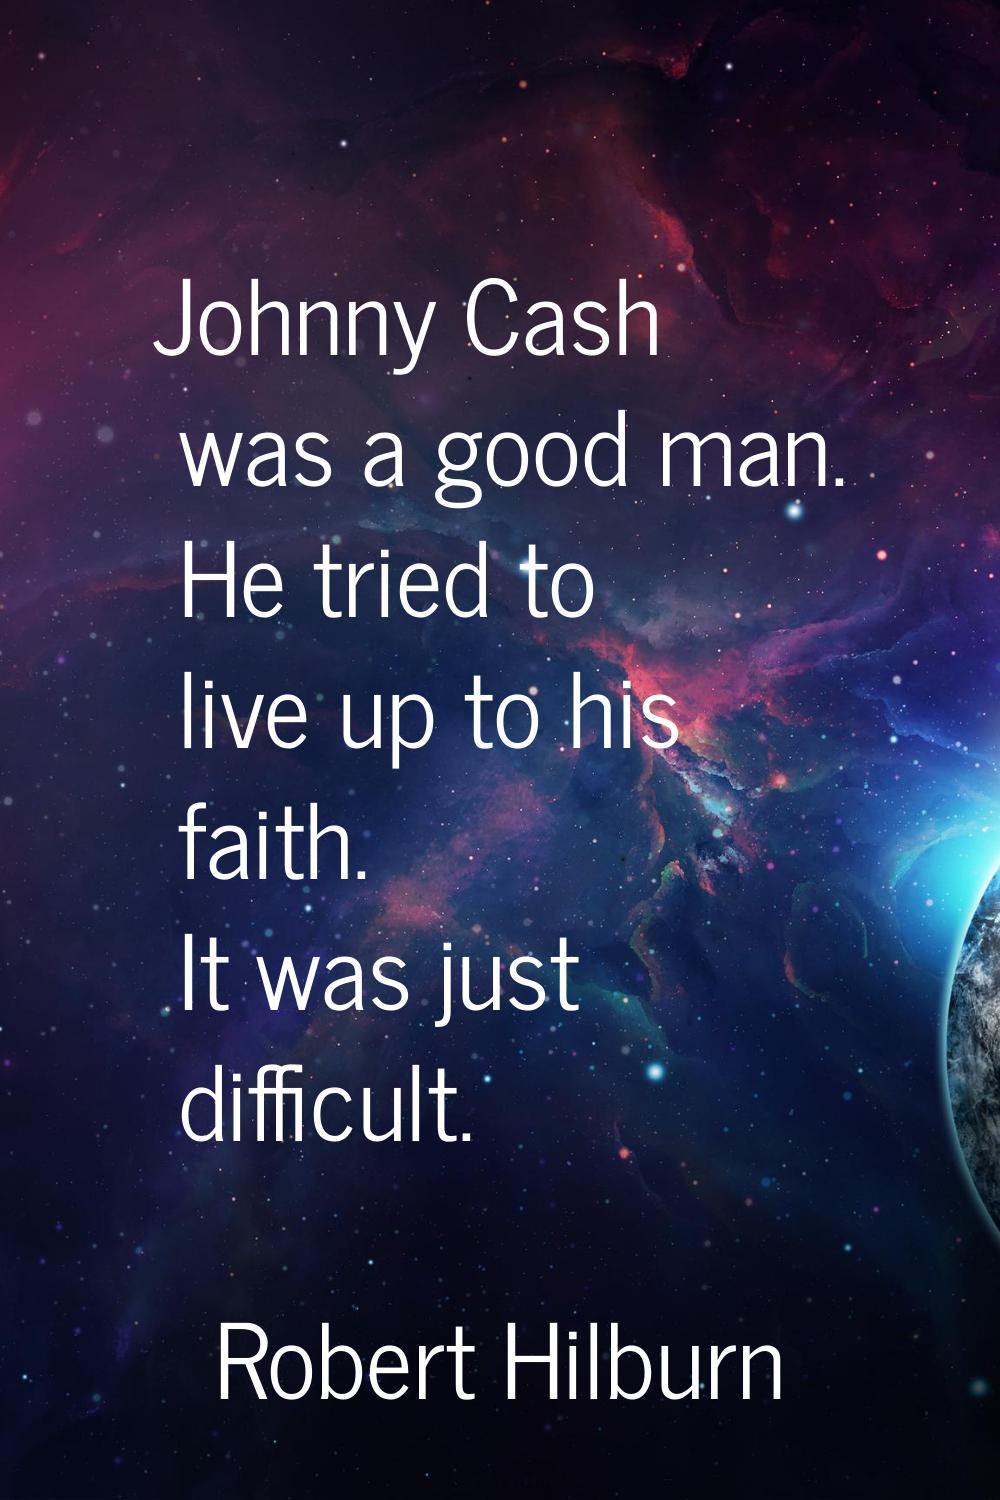 Johnny Cash was a good man. He tried to live up to his faith. It was just difficult.